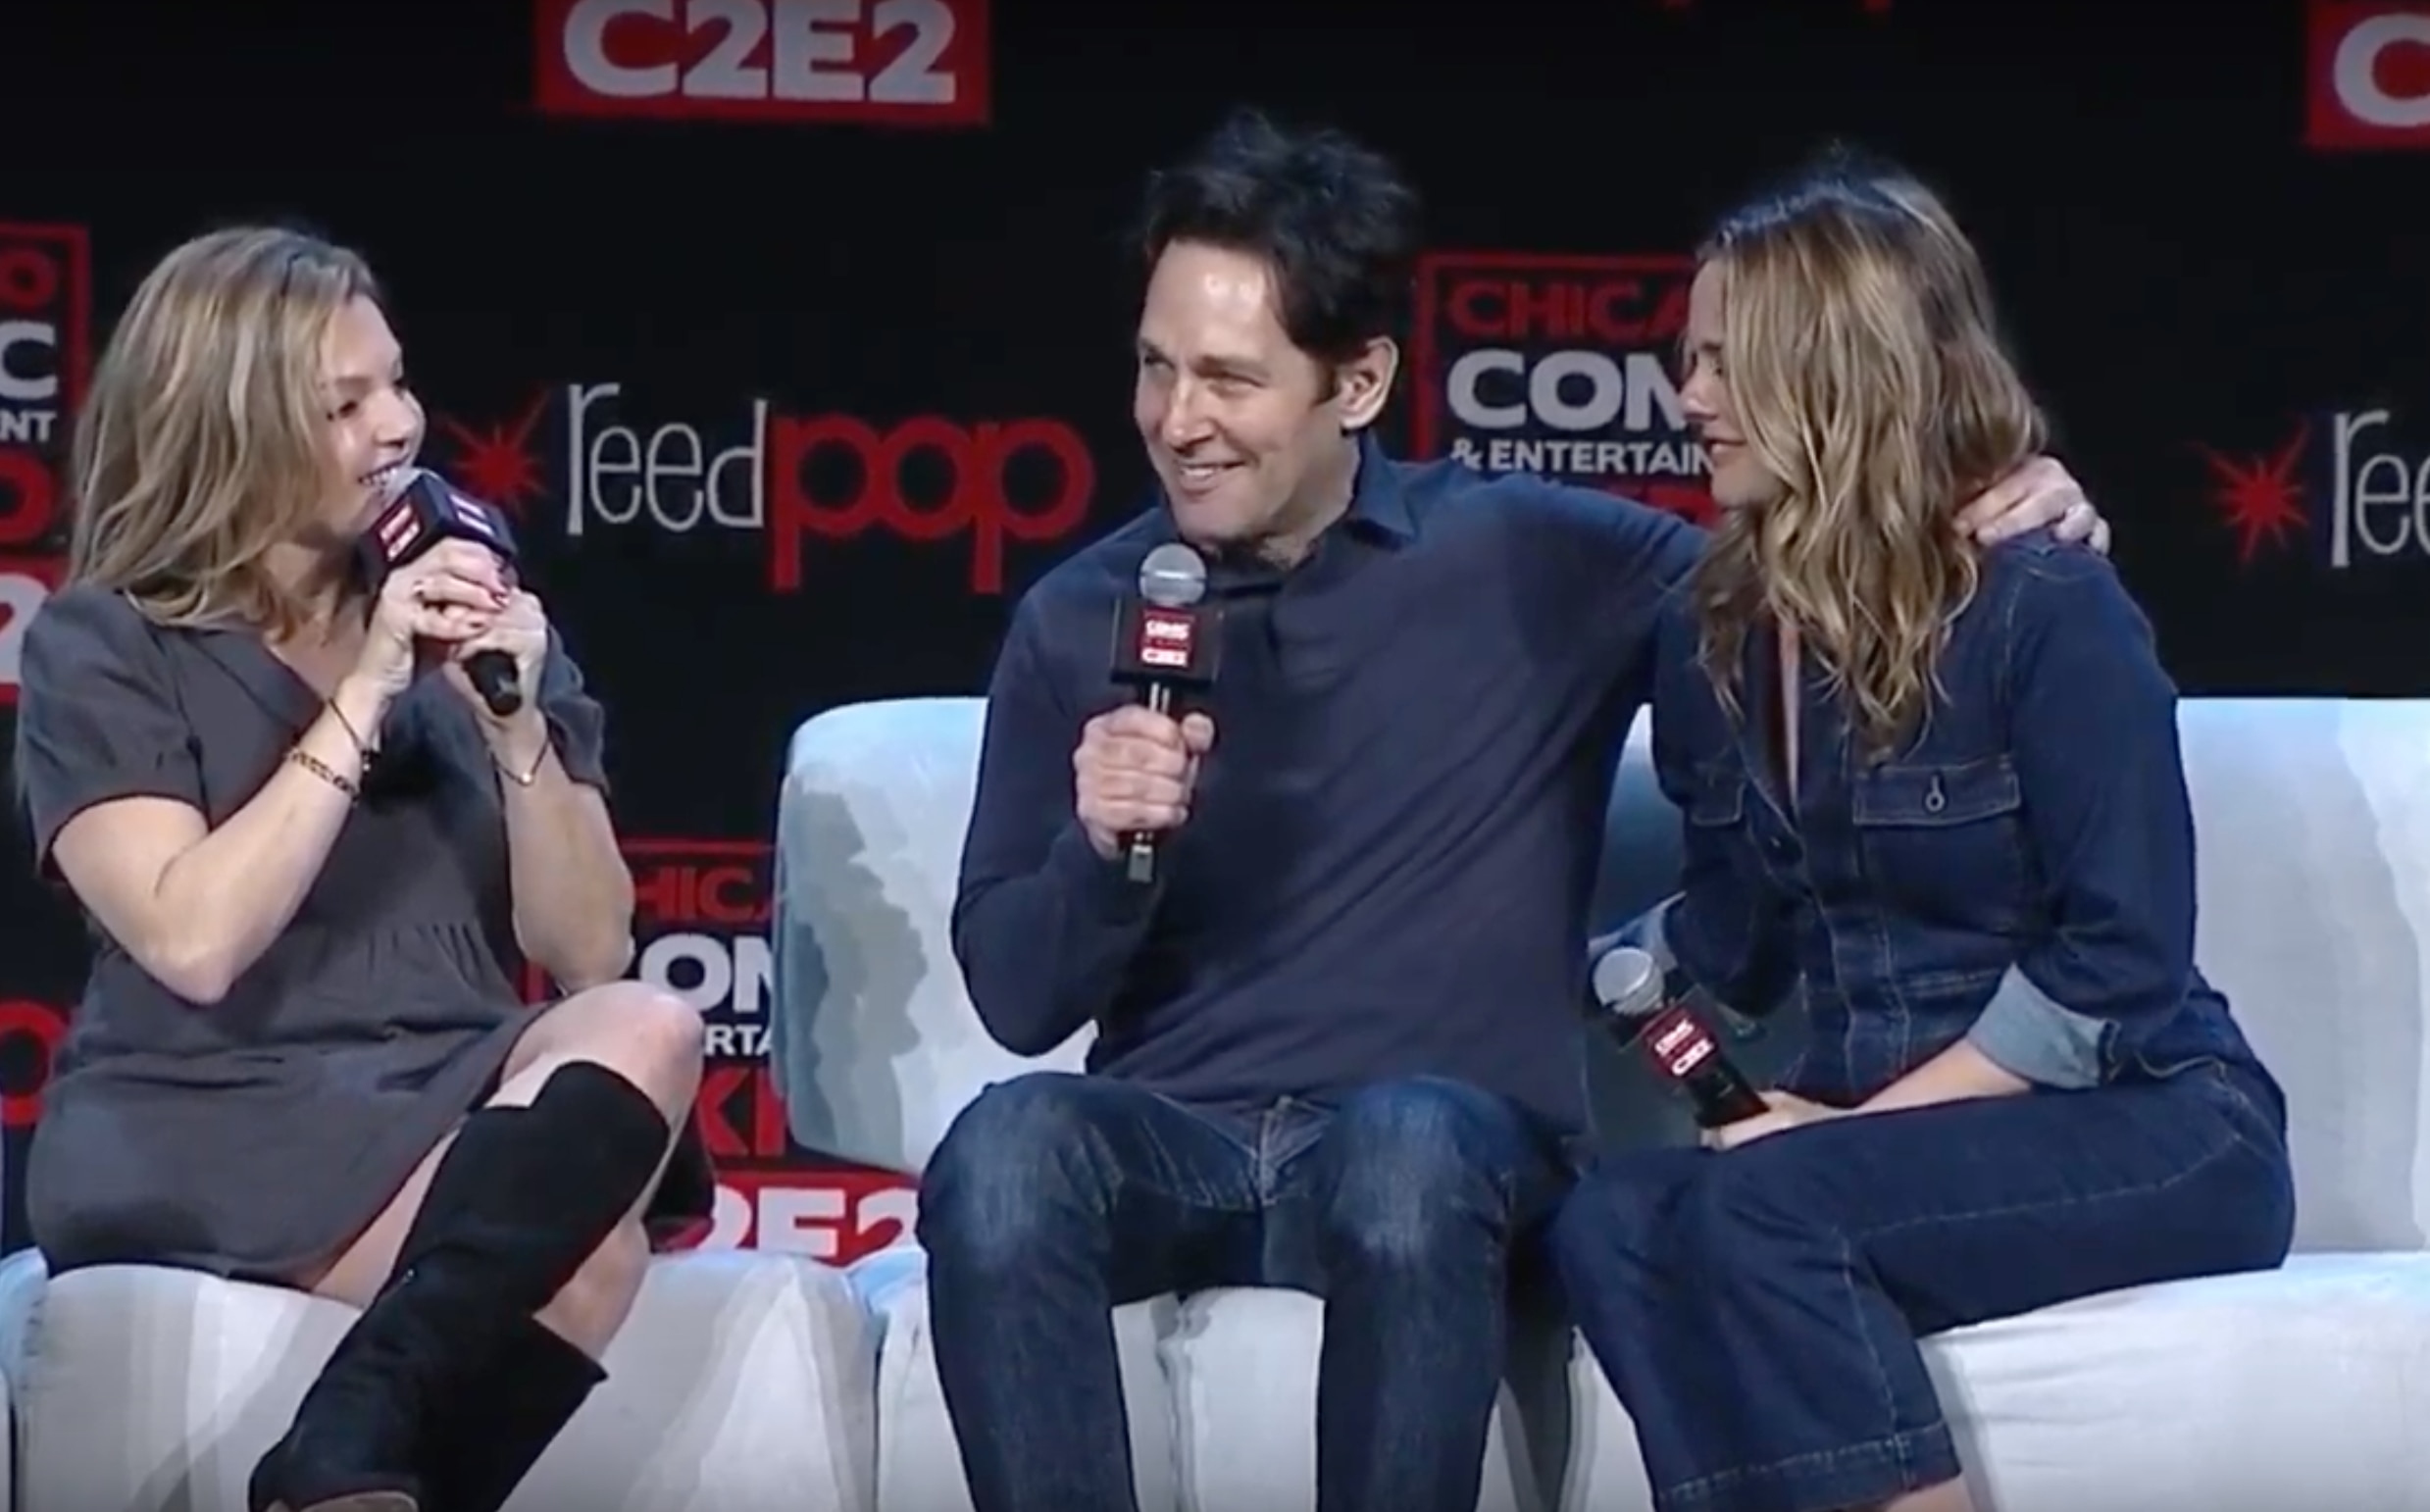 Paul Rudd and the cast of Clueless at C2E2 2019